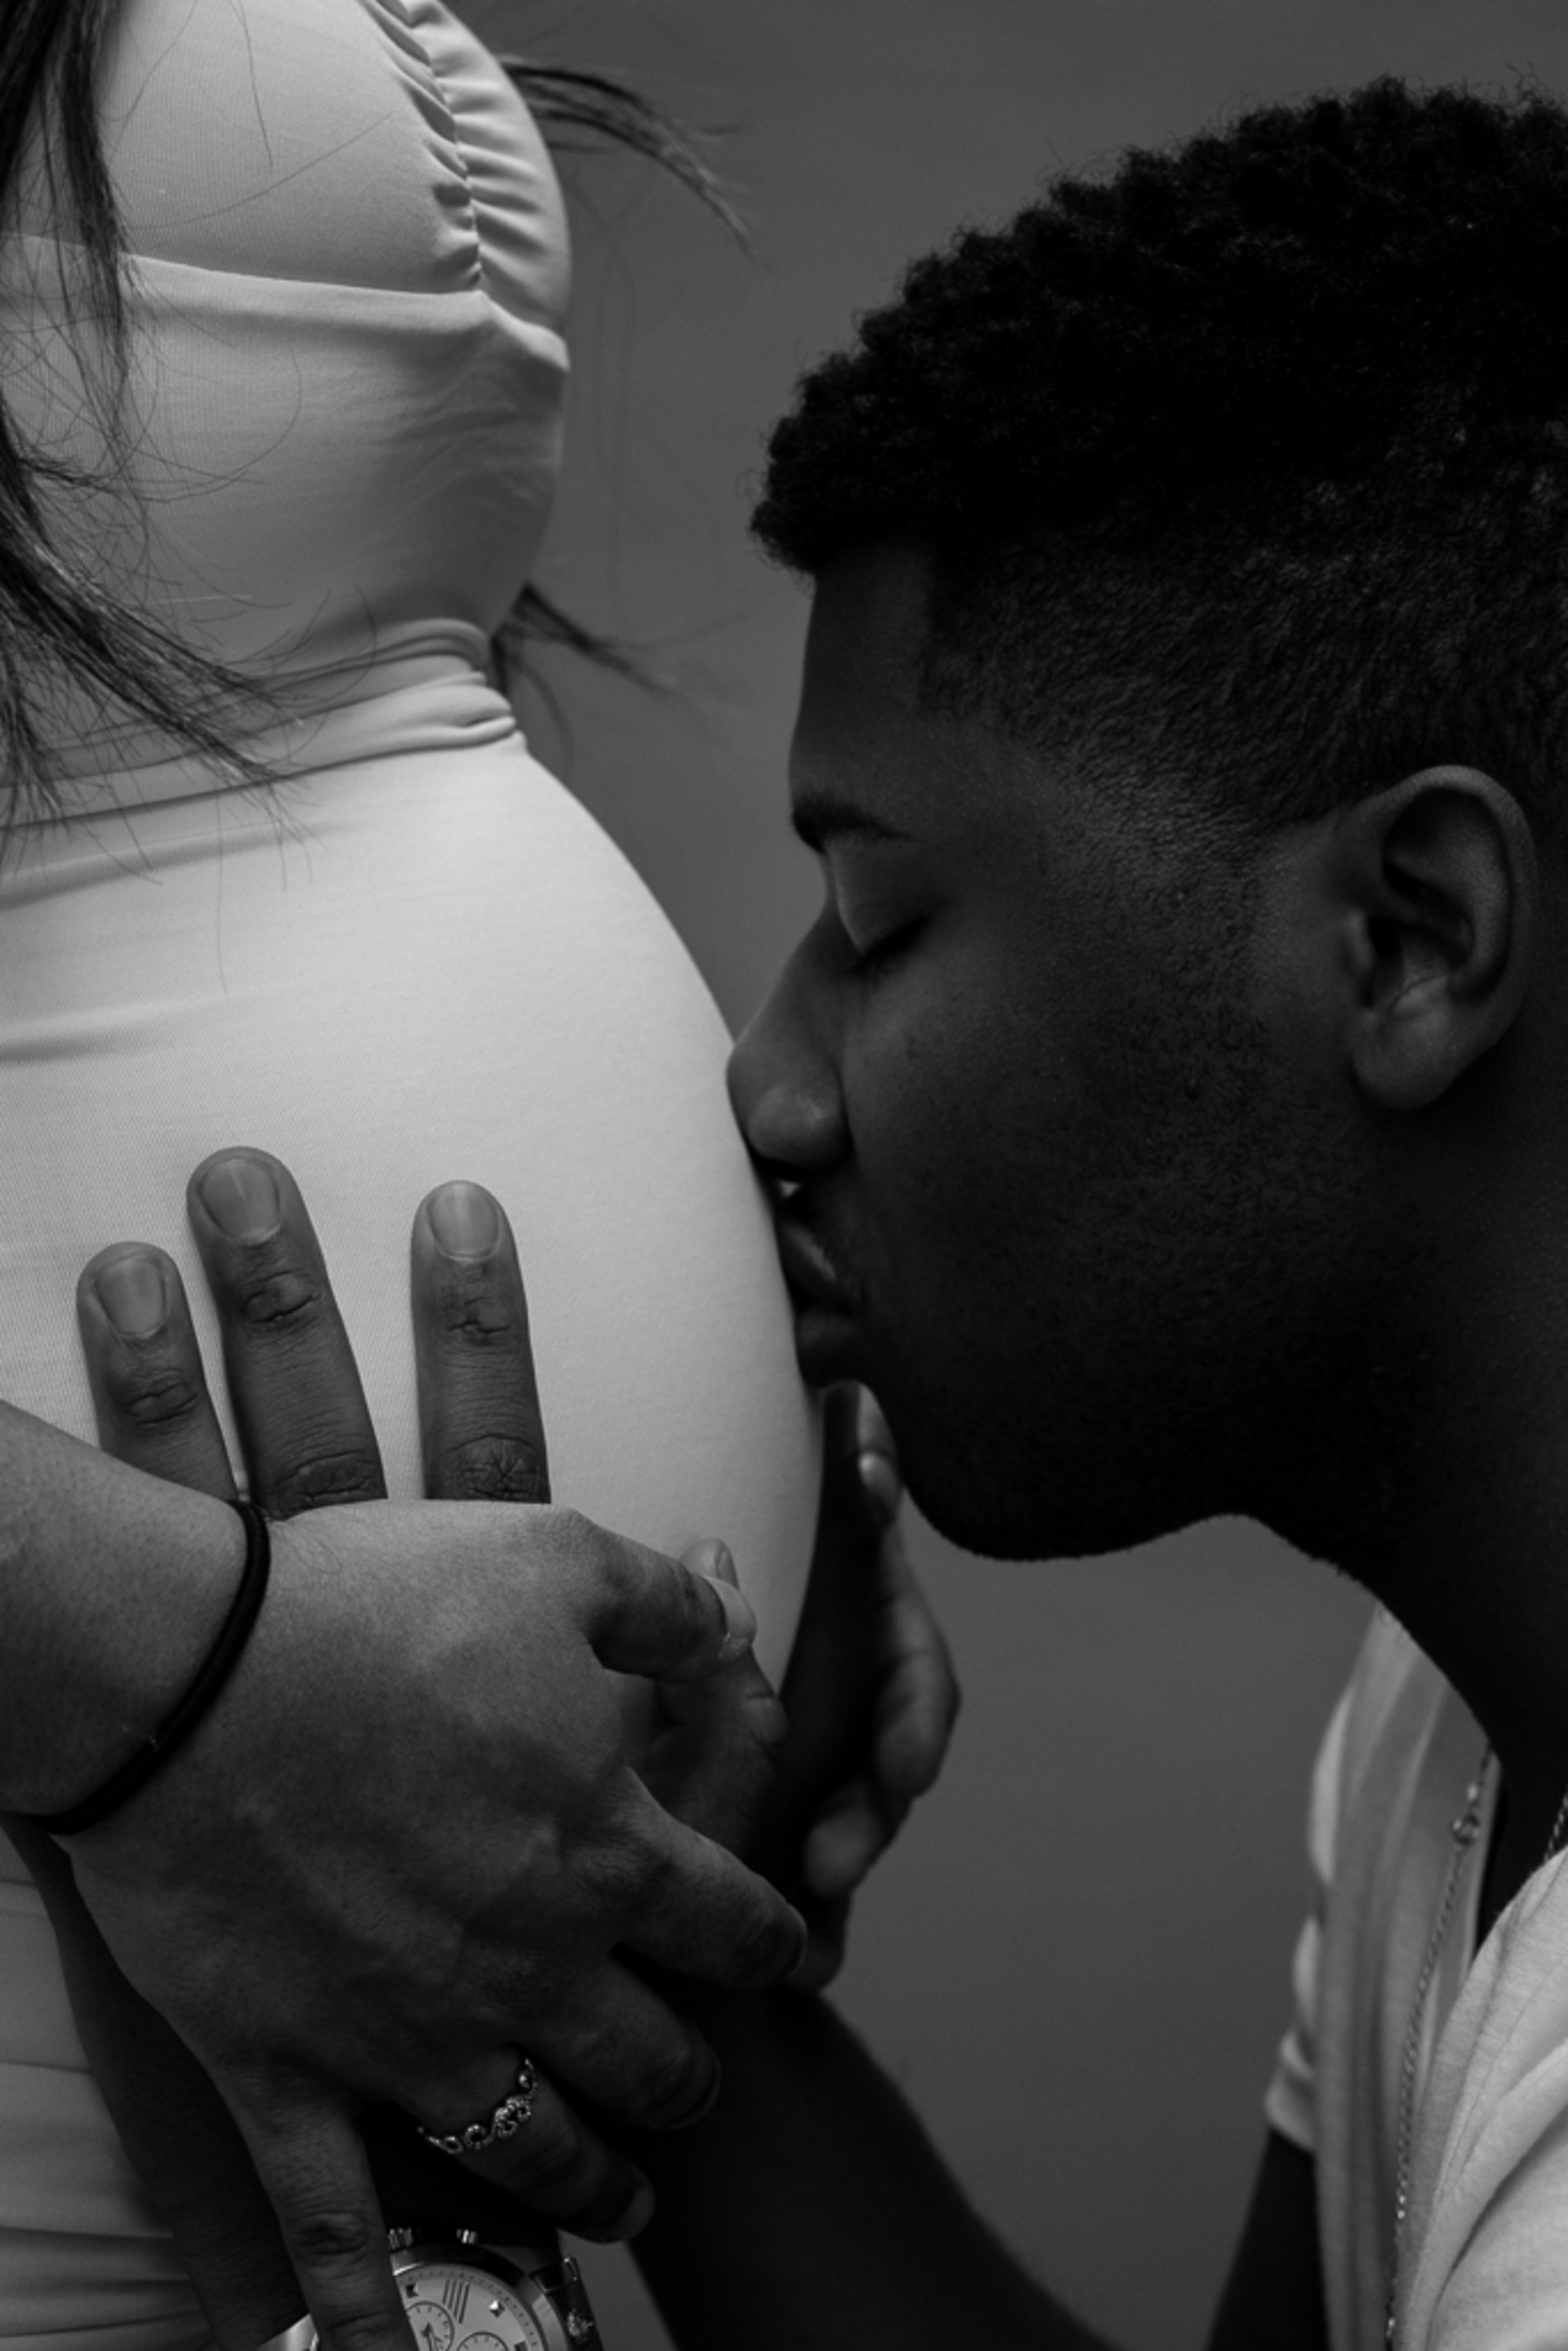 A black and white maternity photoshoot featuring a man kissing a pregnant woman.